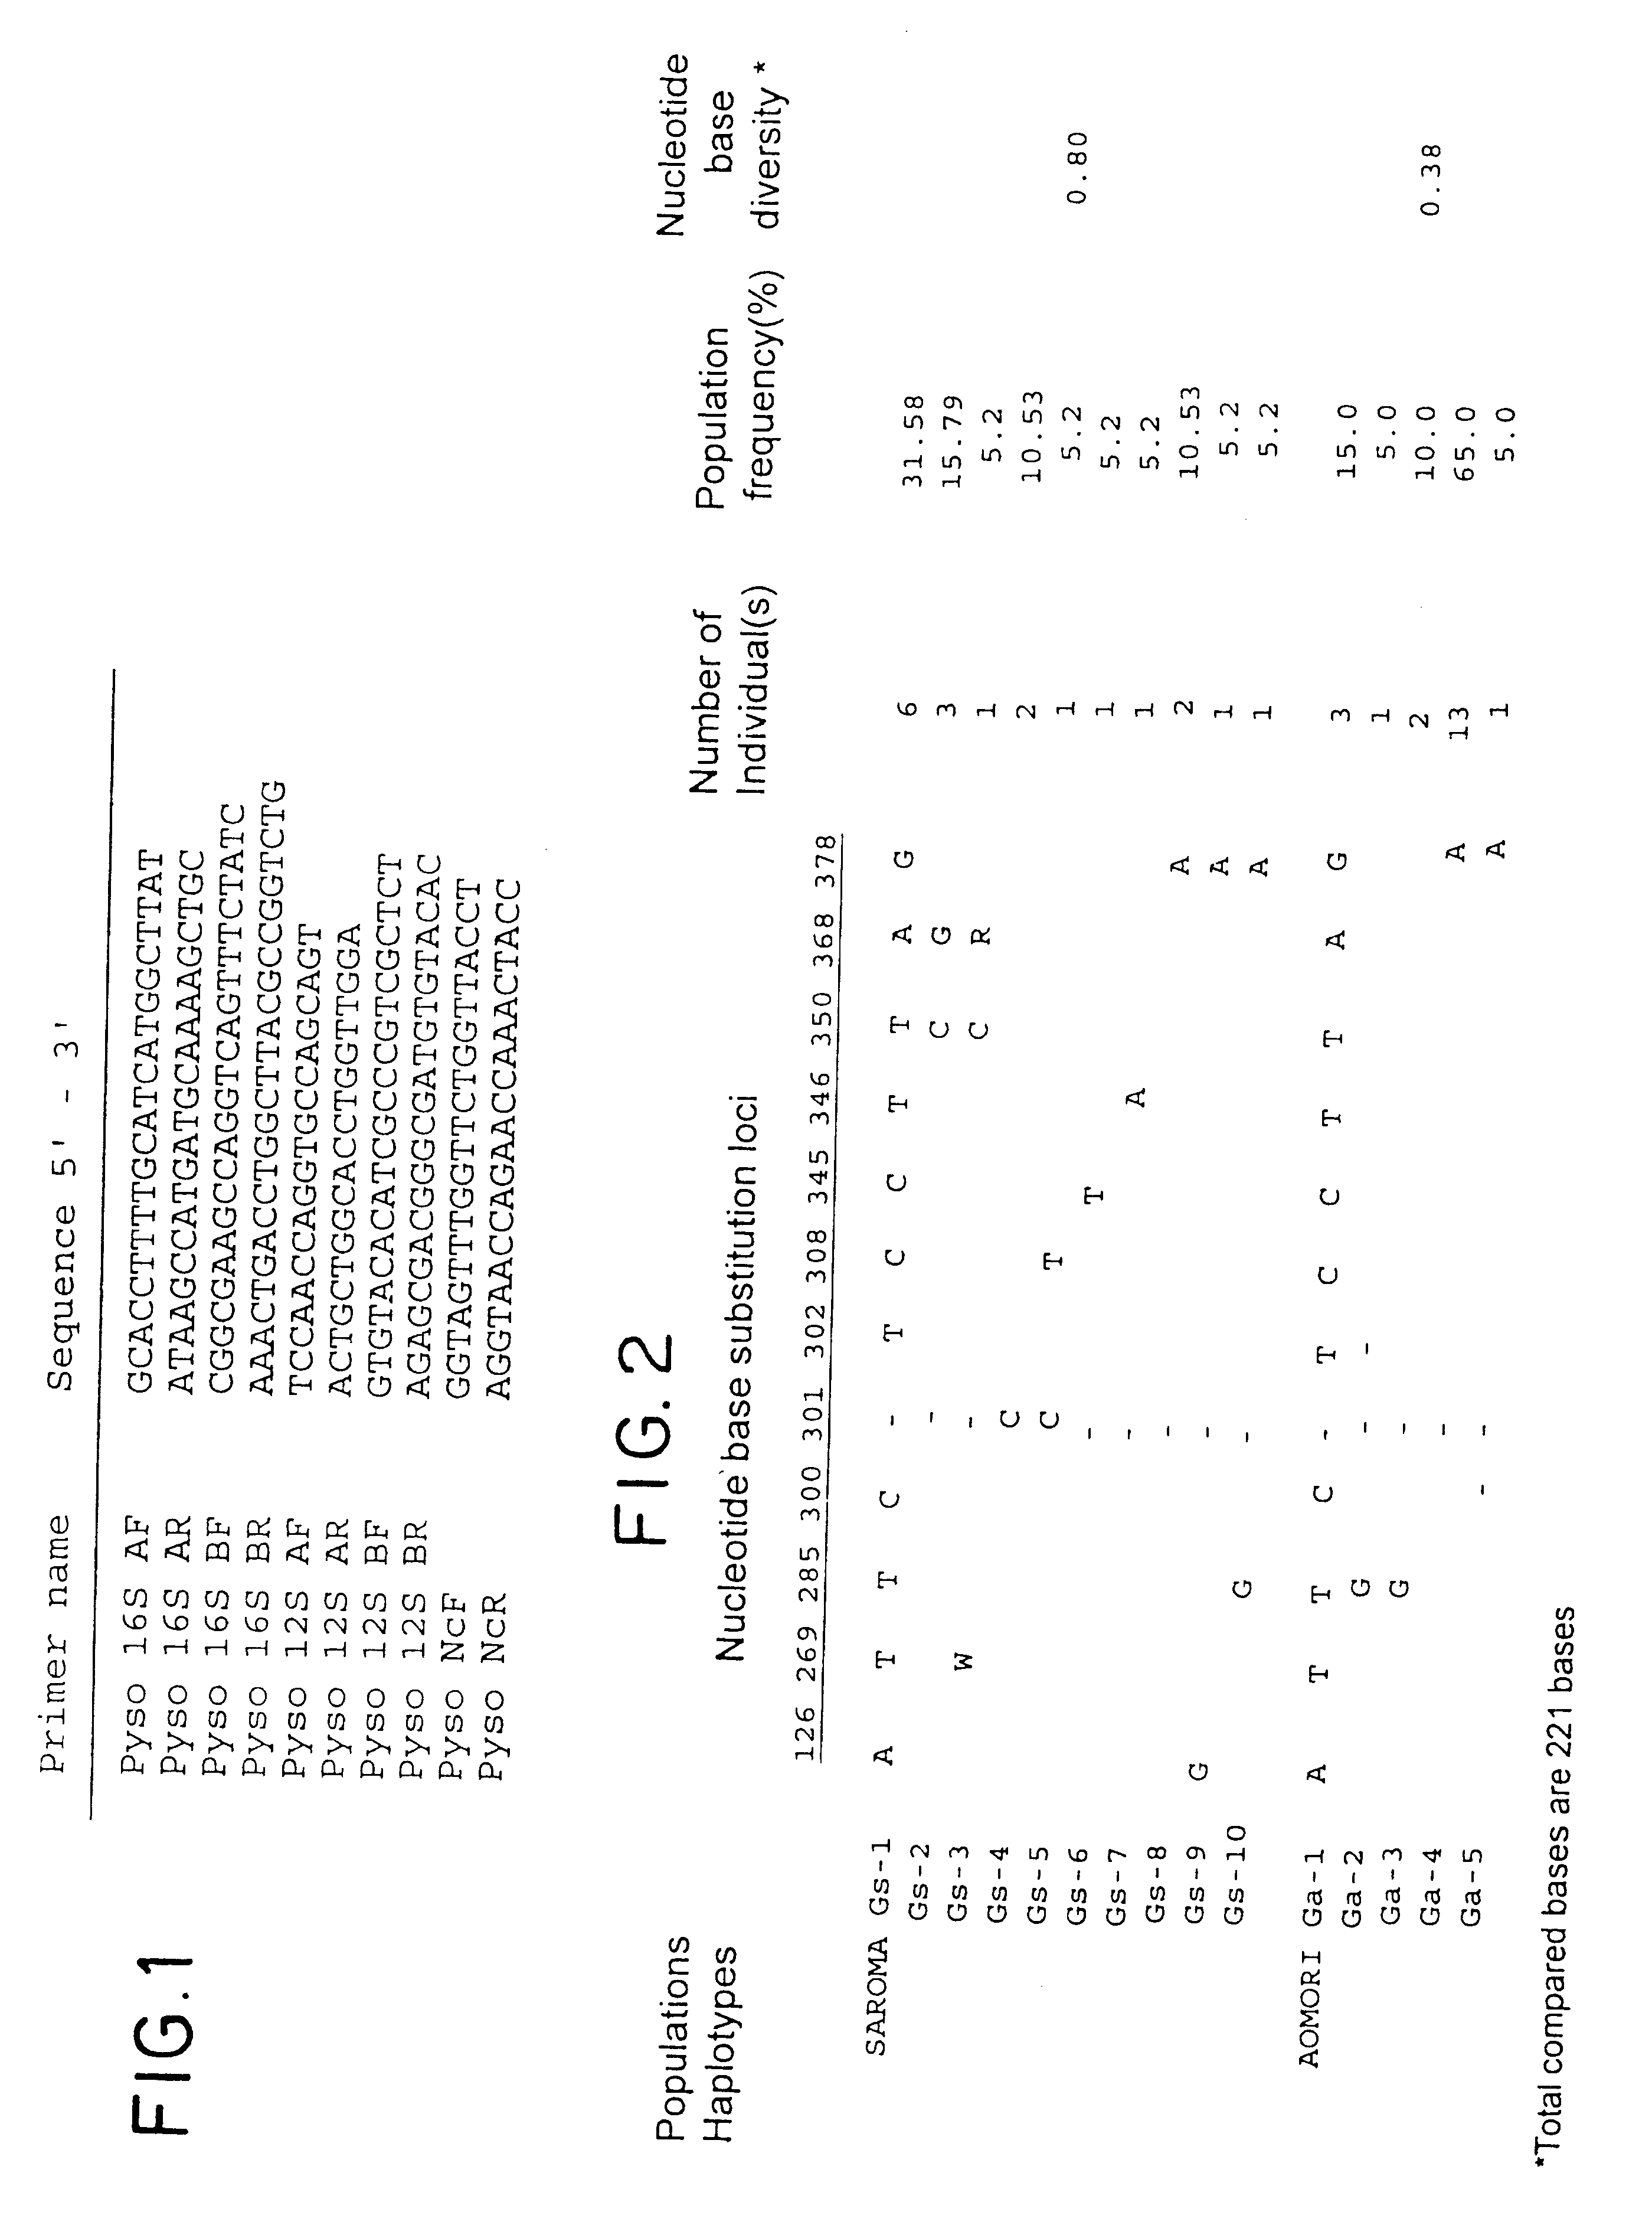 Method for analyzing phyletic lineage of scallop